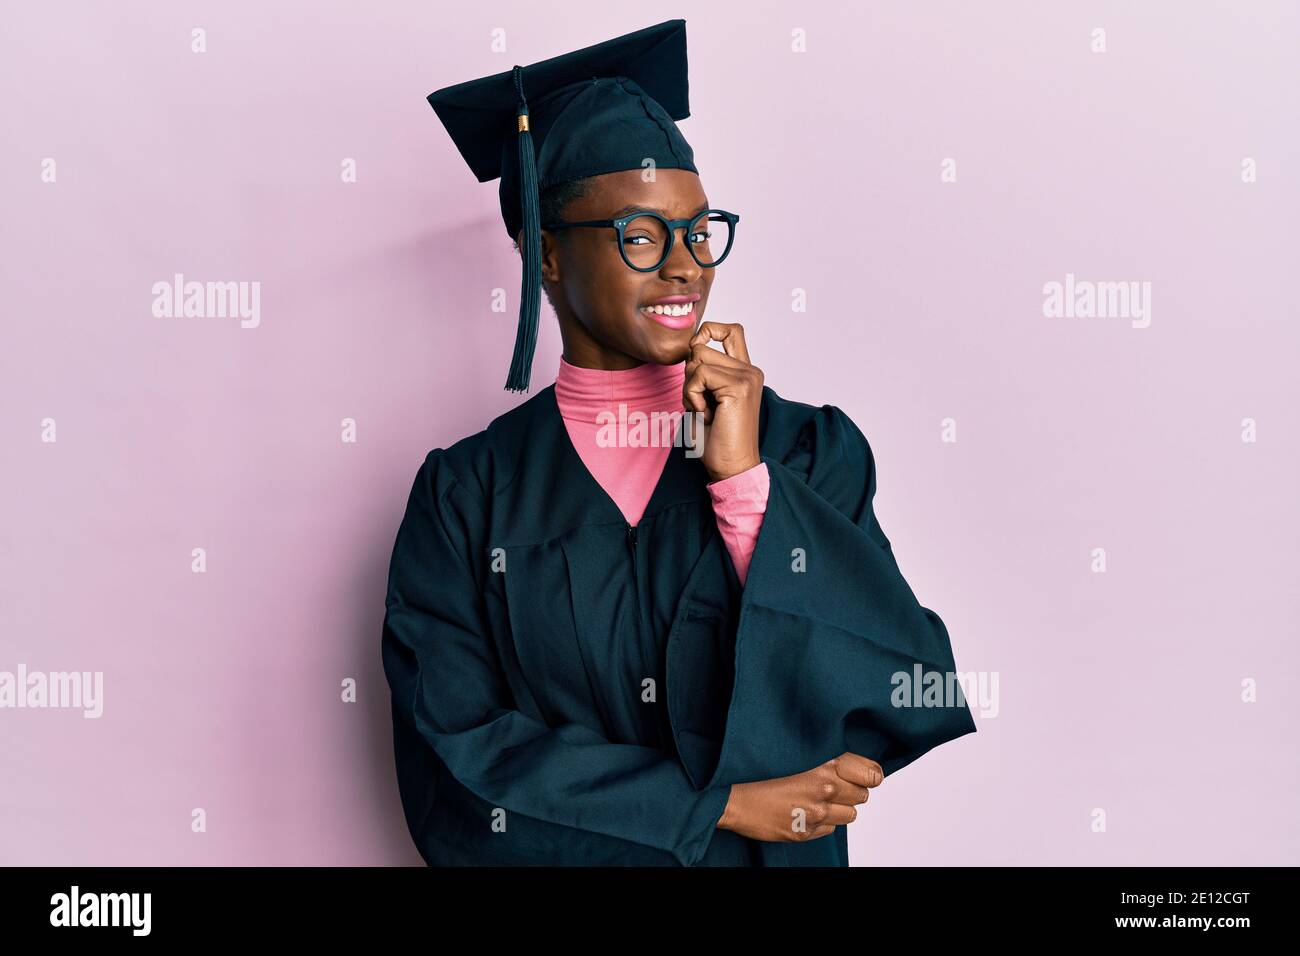 Young african american girl wearing graduation cap and ceremony robe looking confident at the camera smiling with crossed arms and hand raised on chin Stock Photo